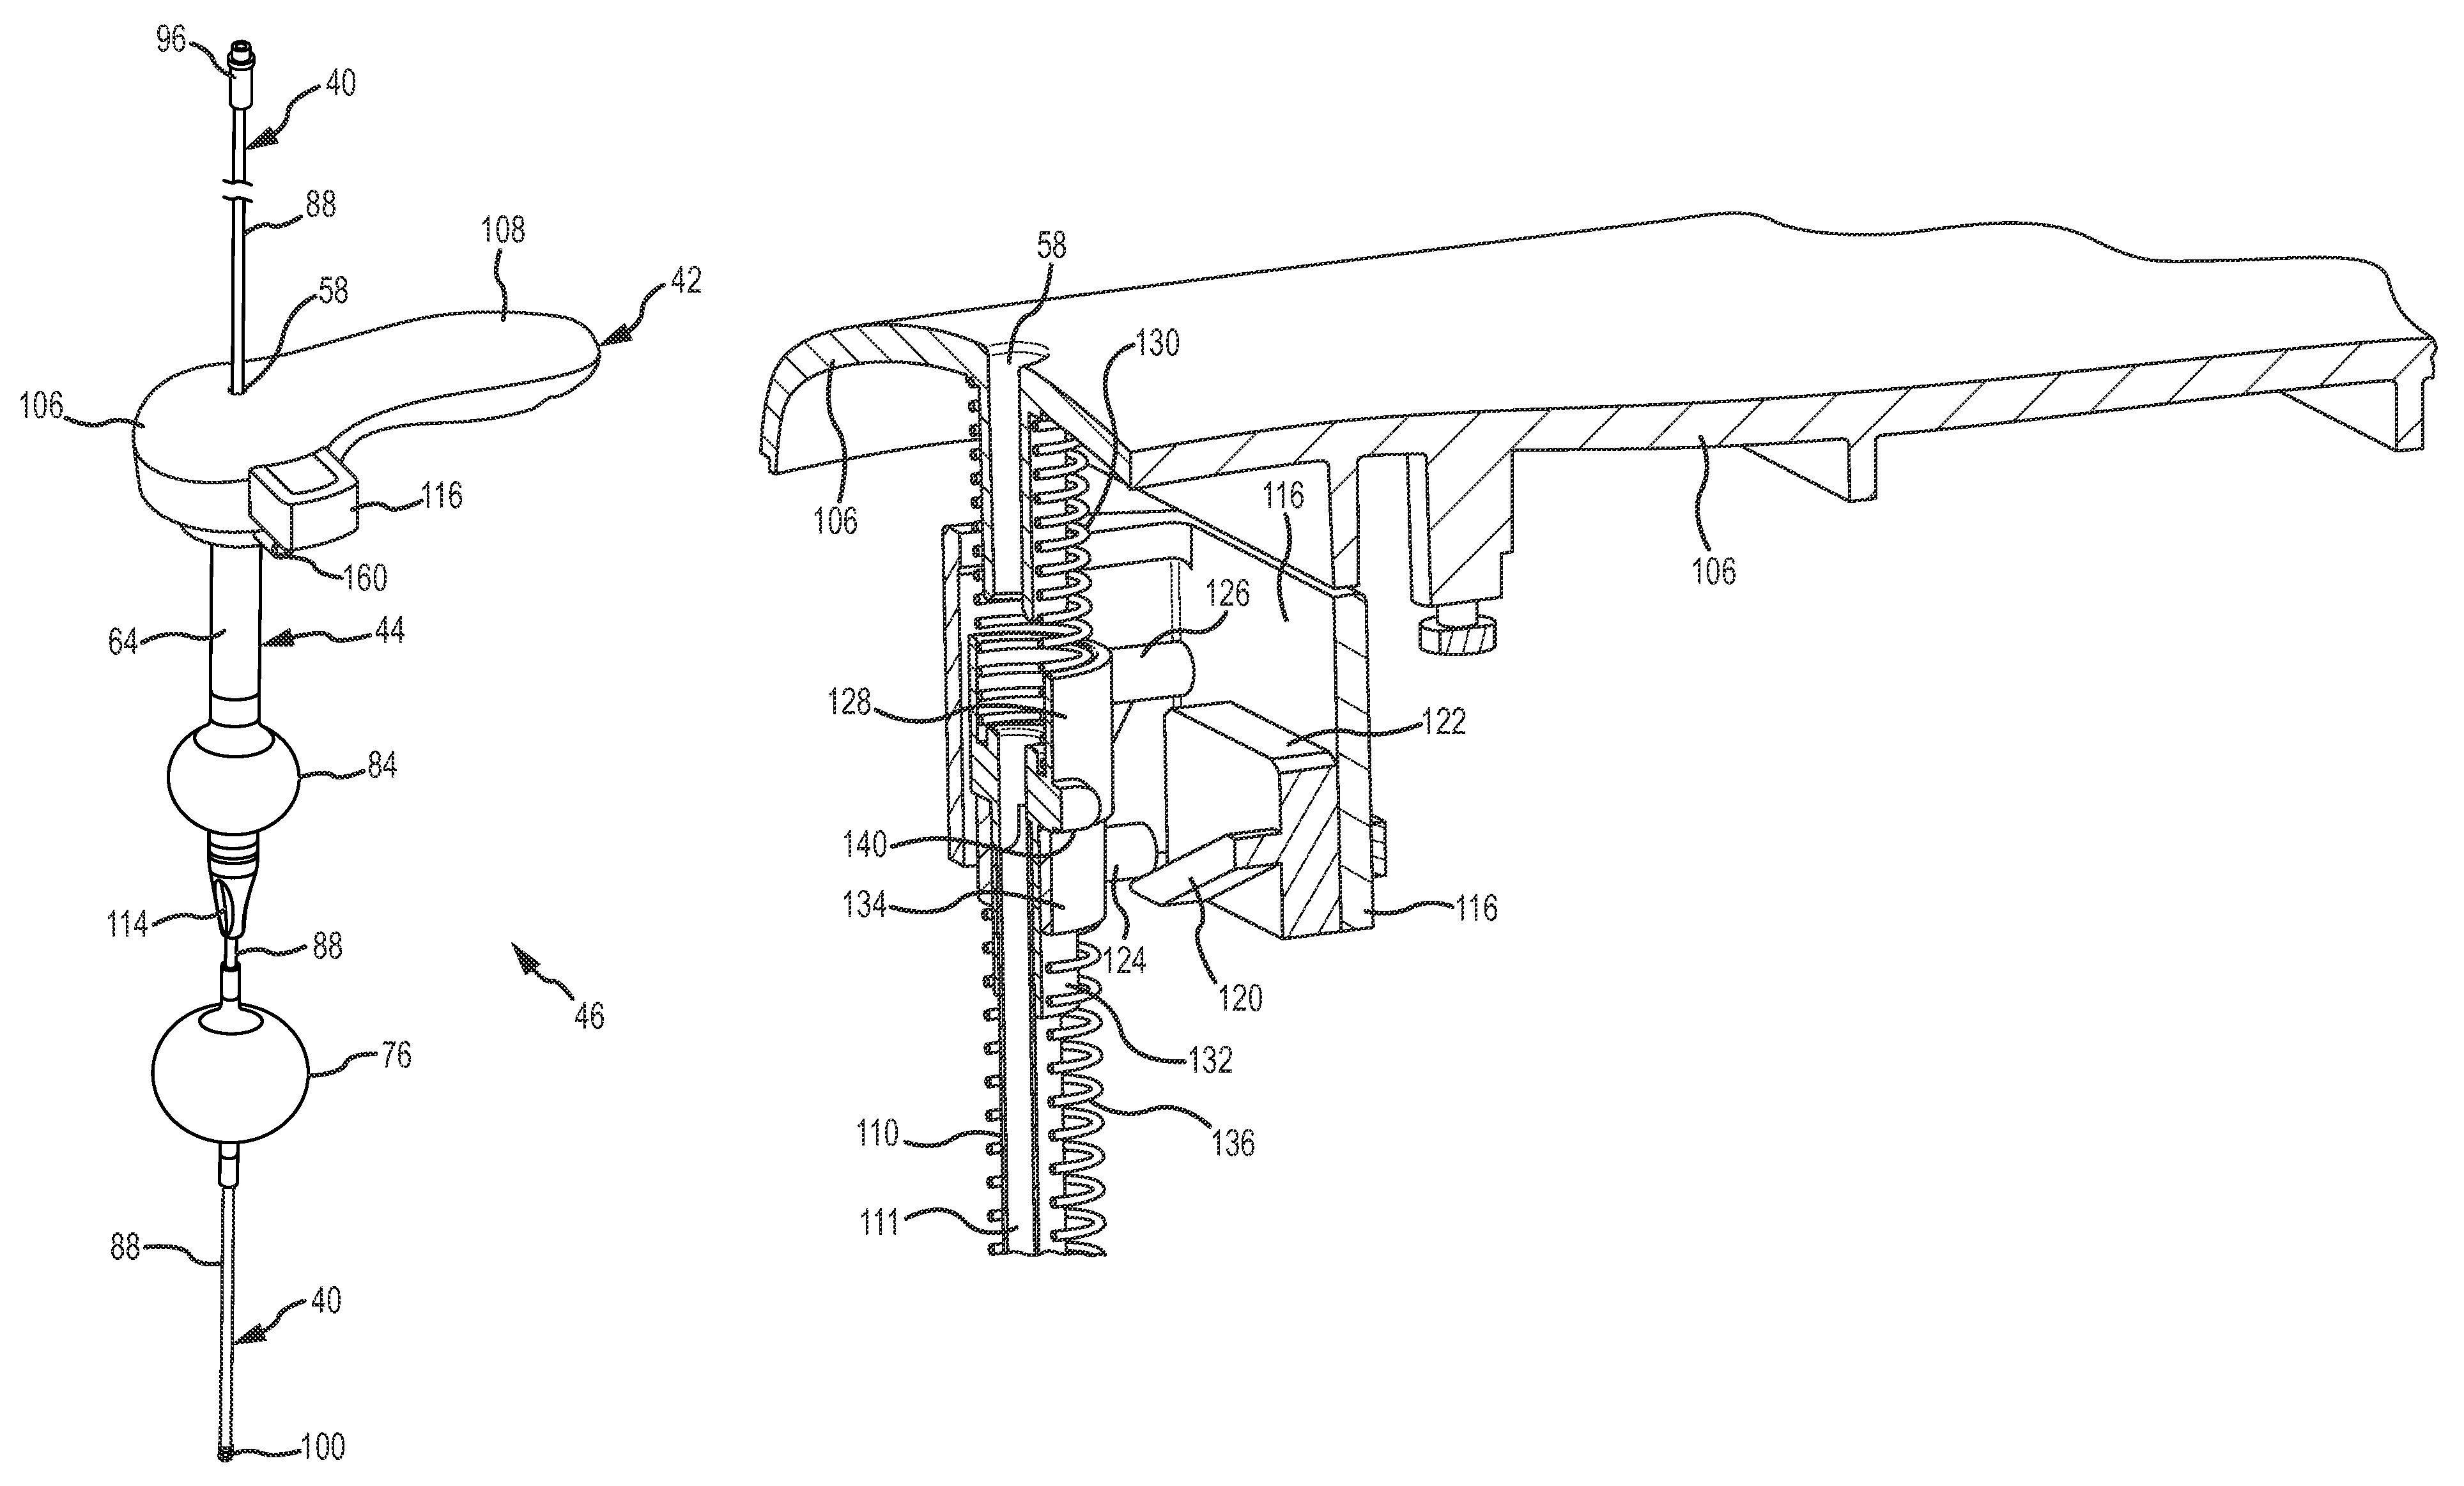 Method and apparatus for placing a cannula in a bladder